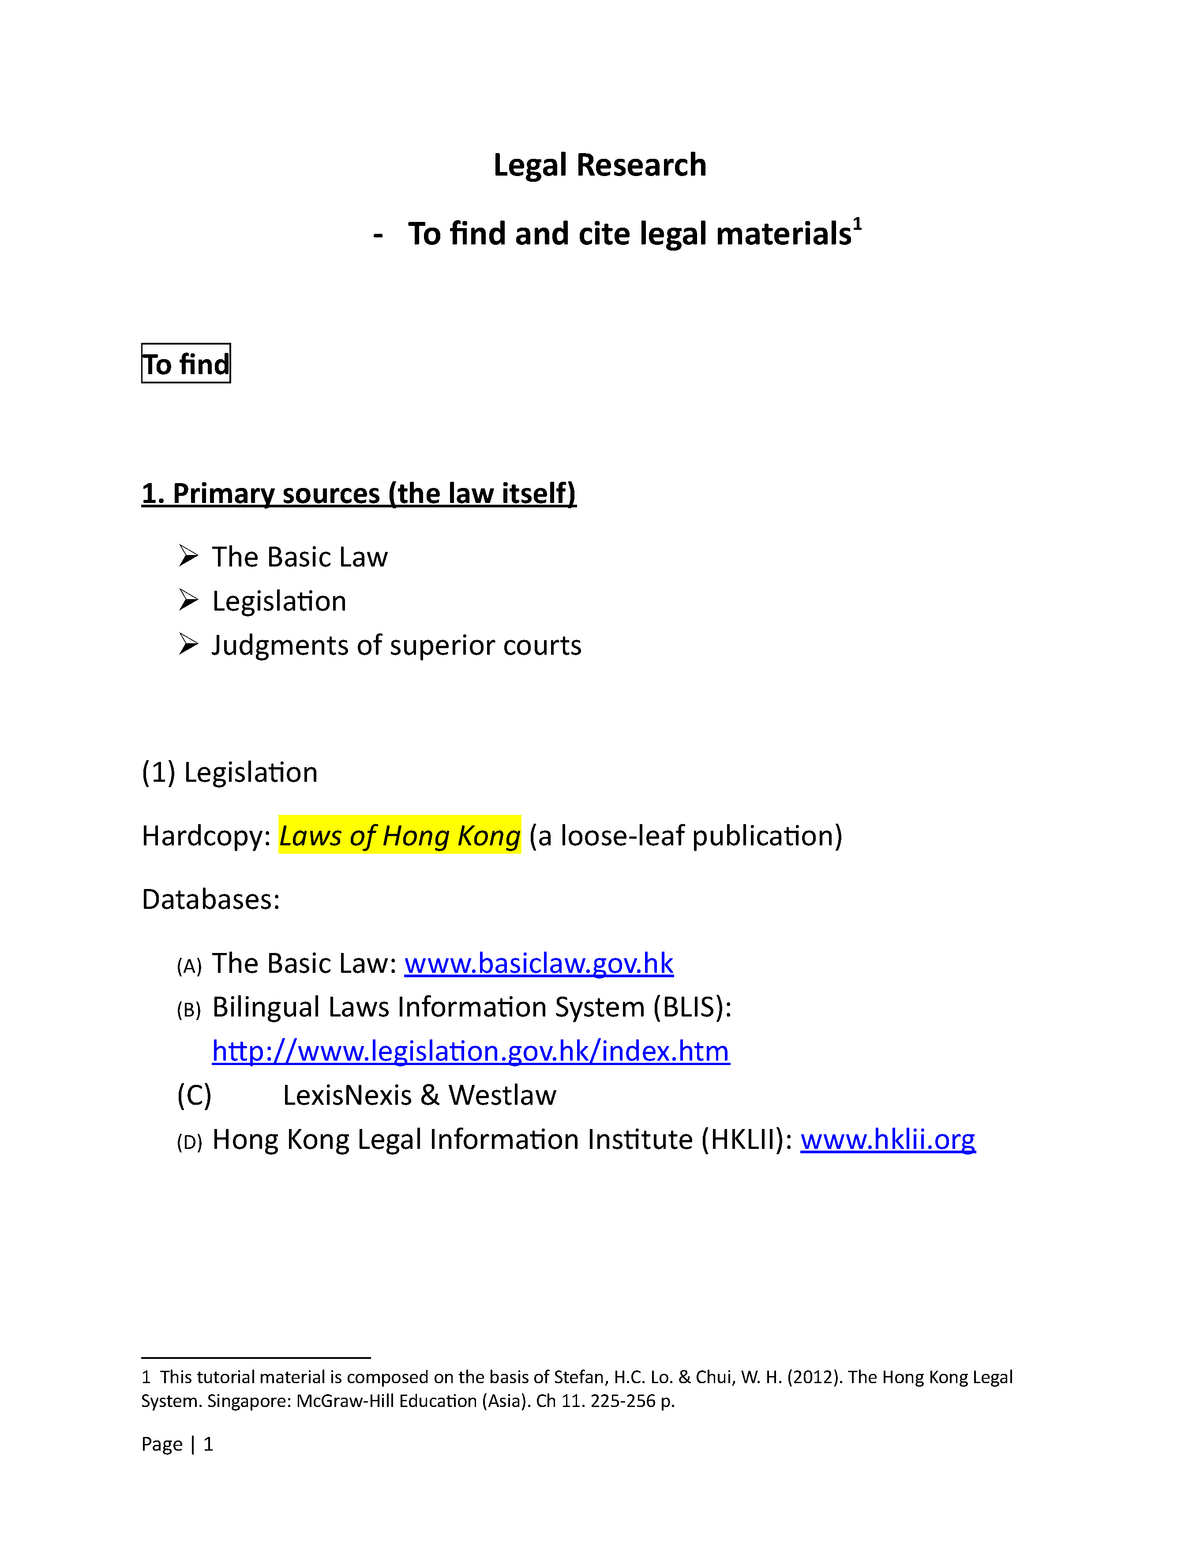 How to find how to cite Legal Research Finding Citing Legal Materials